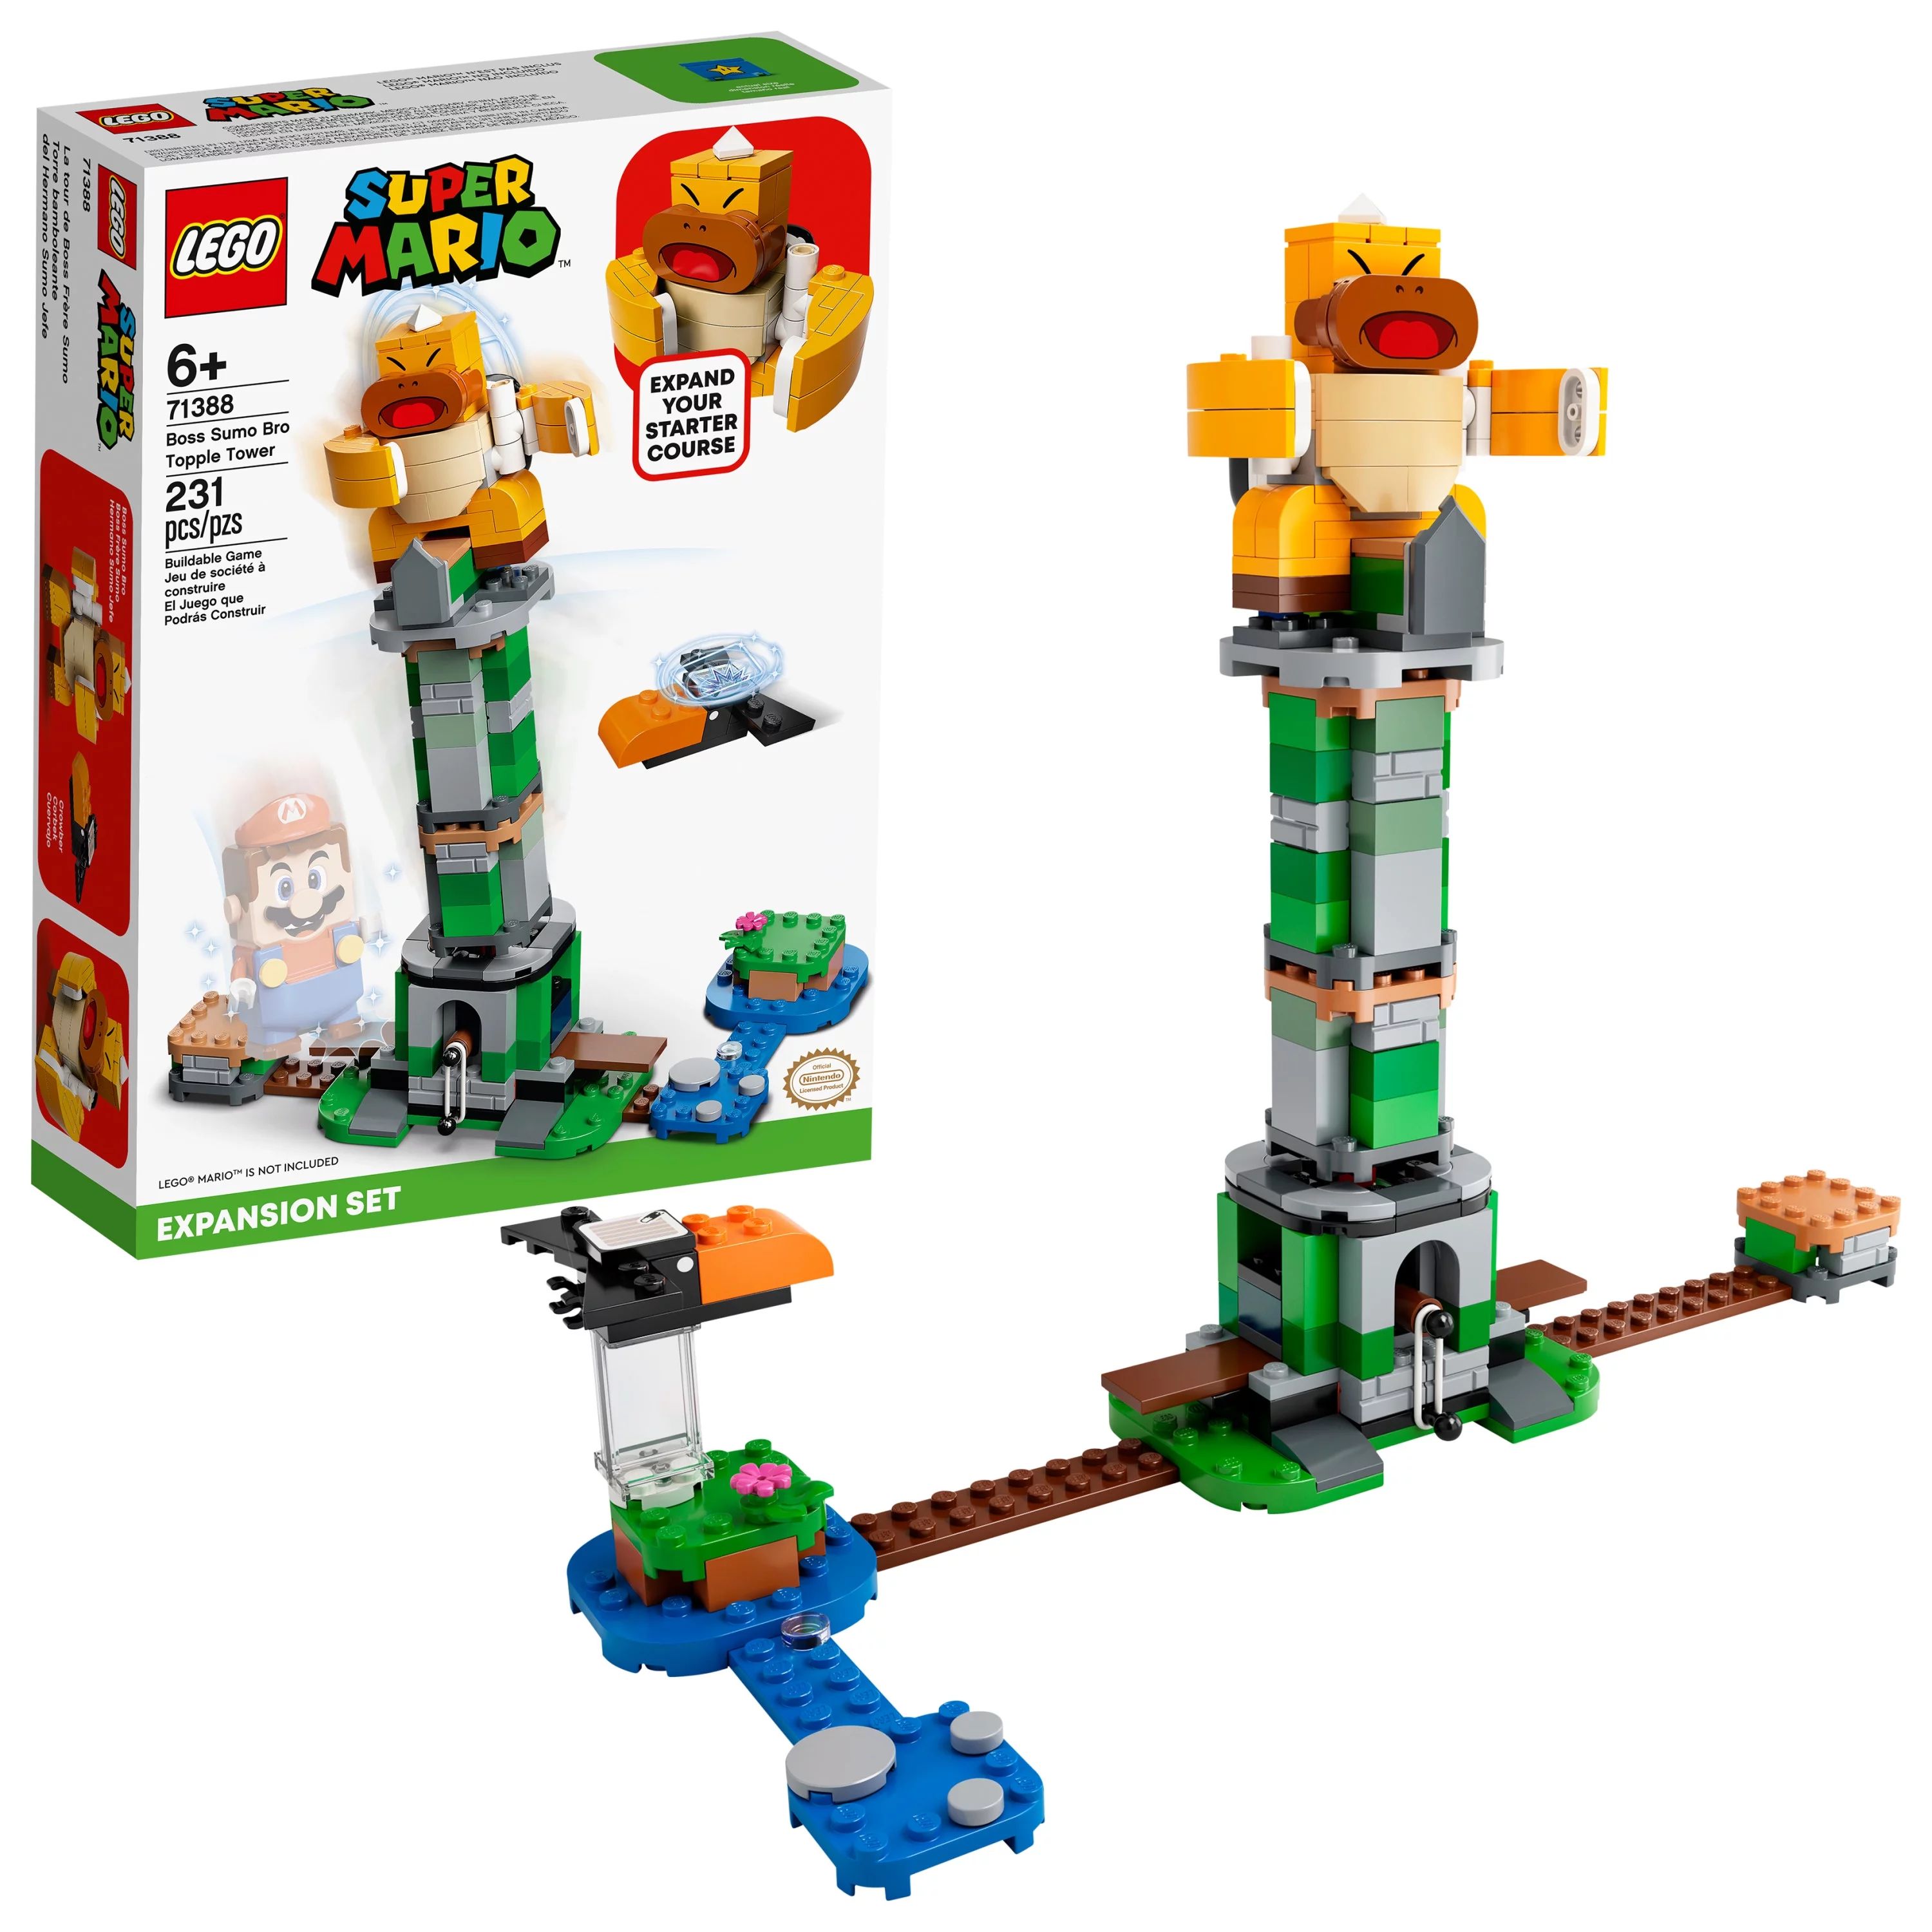 LEGO Super Mario Boss Sumo Bro Topple Tower Expansion Set 71388 Building Toy for Kids (231 Pieces... | Walmart (US)